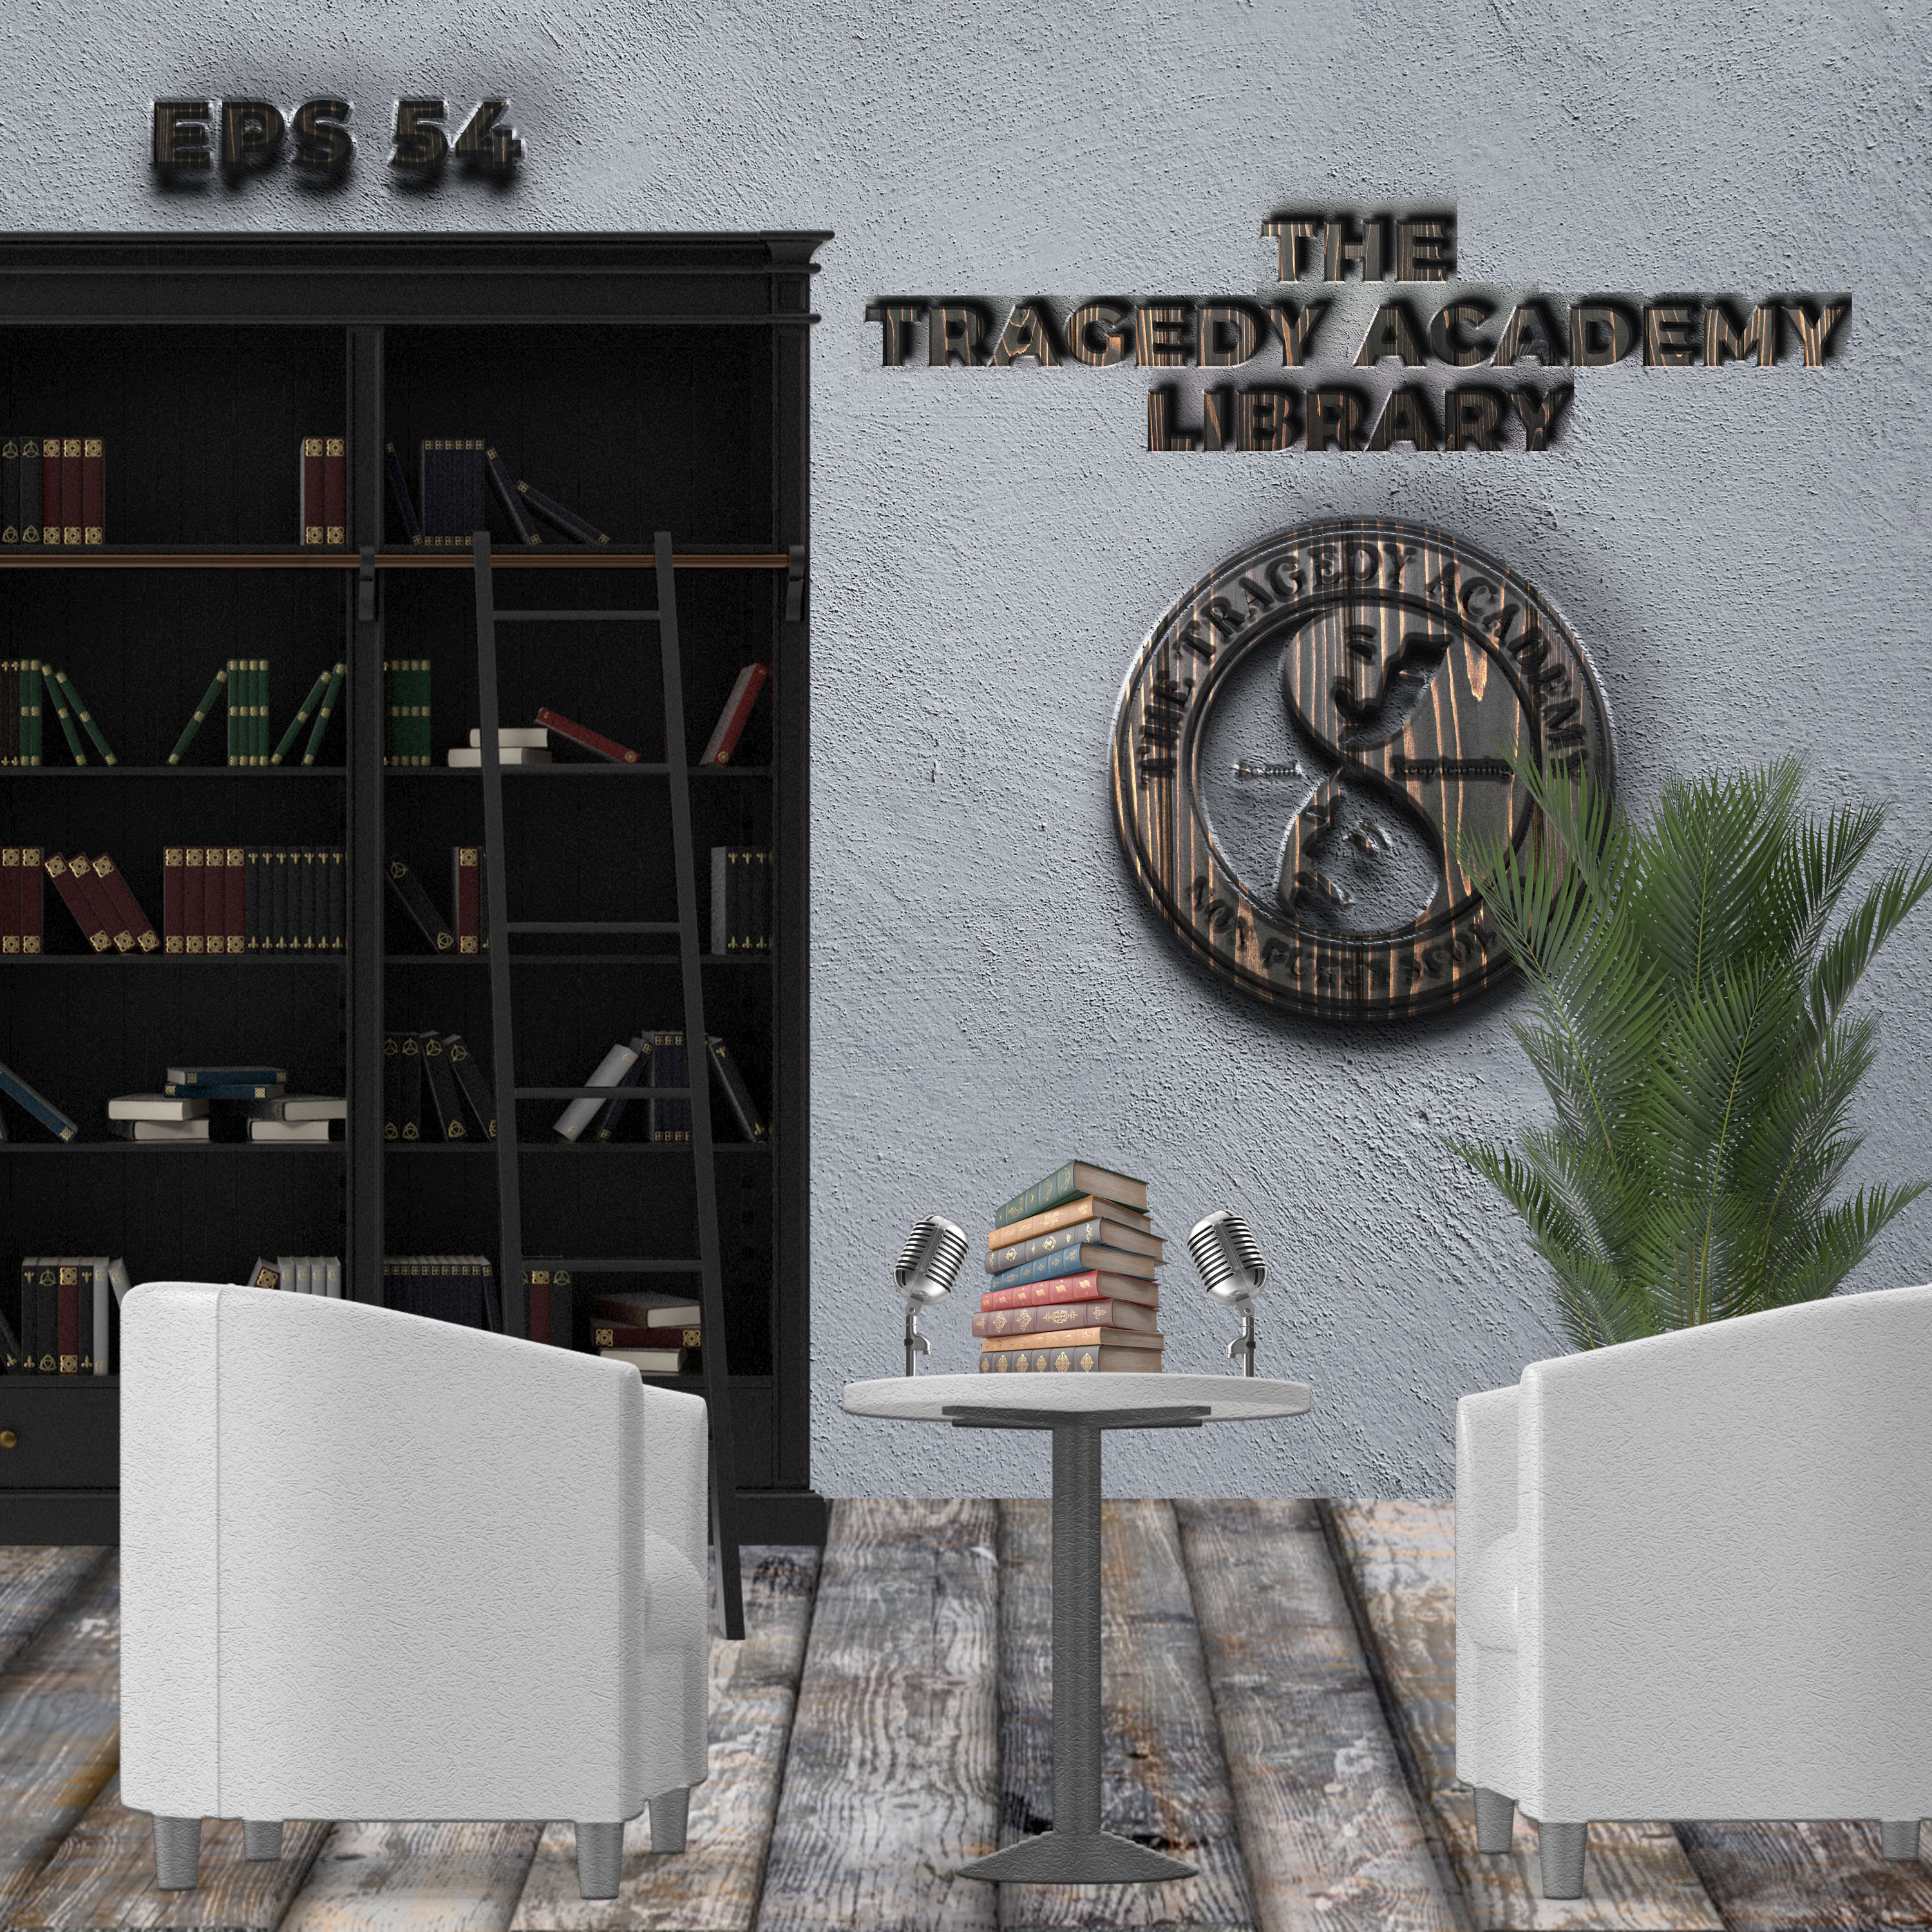 The Tragedy Academy Library